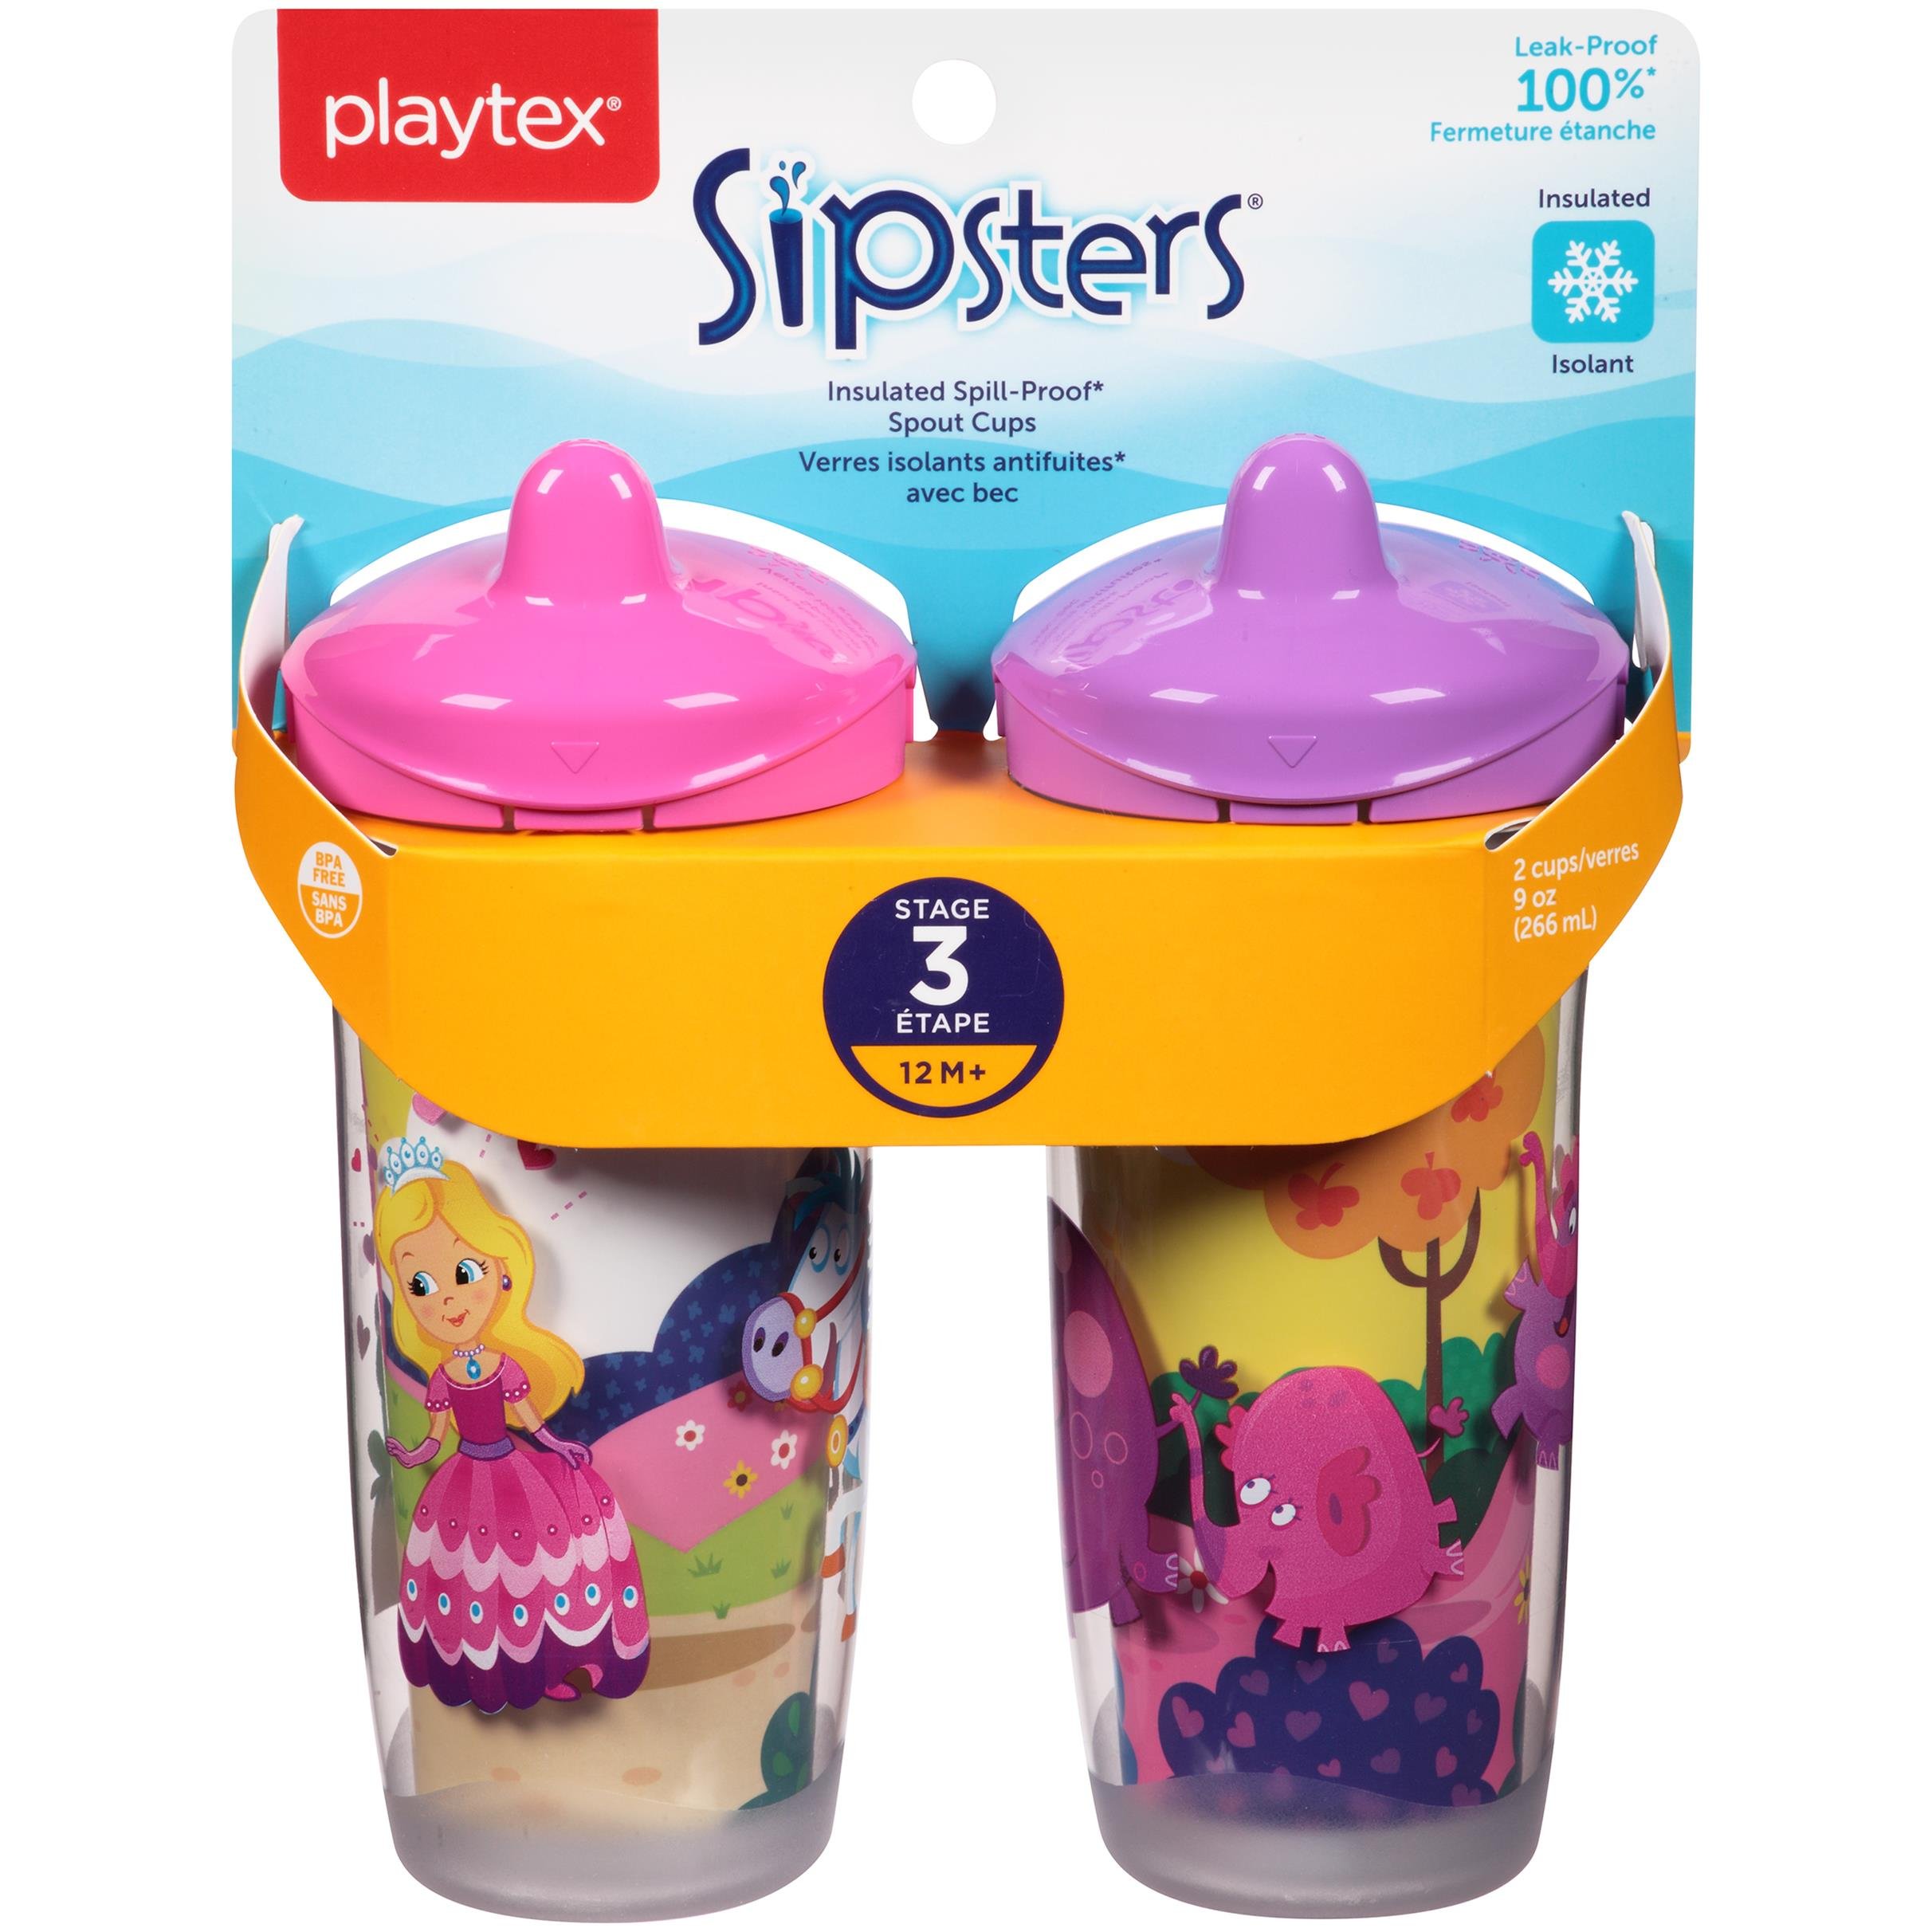 Playtex Sipsters Stage 3 Spill-Proof, Leak-Proof, Break-Proof Insulated Spout Sippy Cups - 9 Ounce - 2 Pack (Color and Design May Vary)